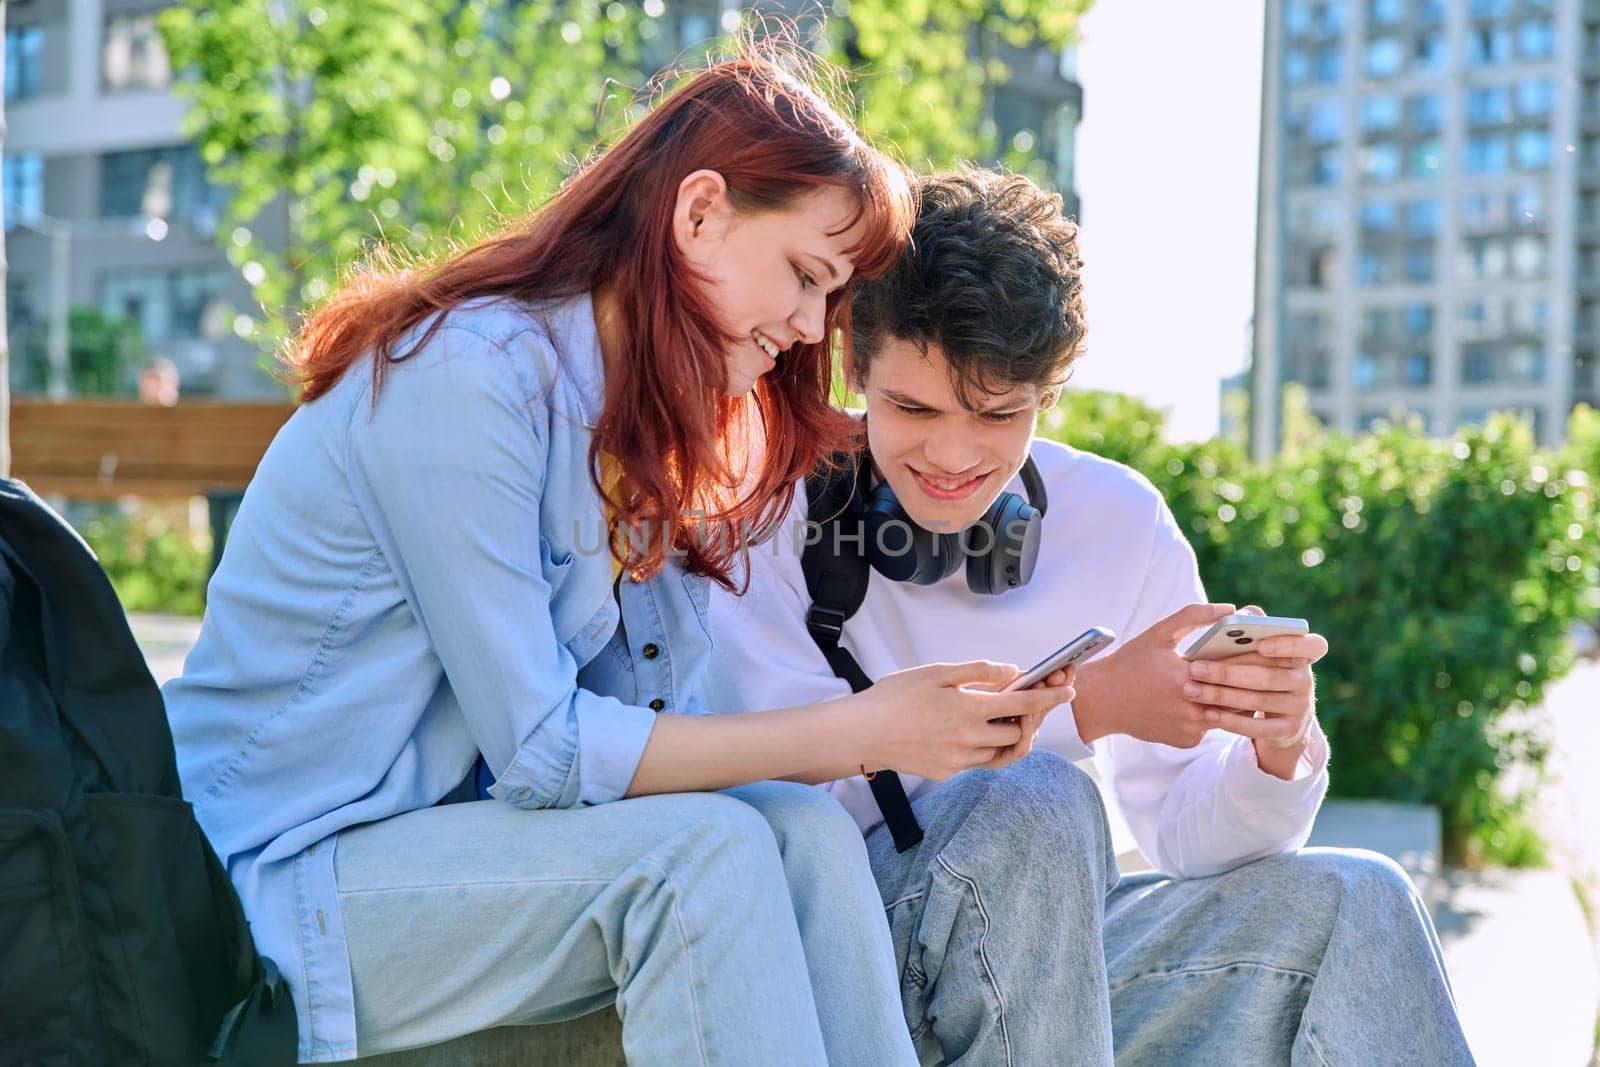 Teenage youth friends guy and girl university college students sitting outdoor on campus steps talking laughing using smartphone. Technology, lifestyle concept